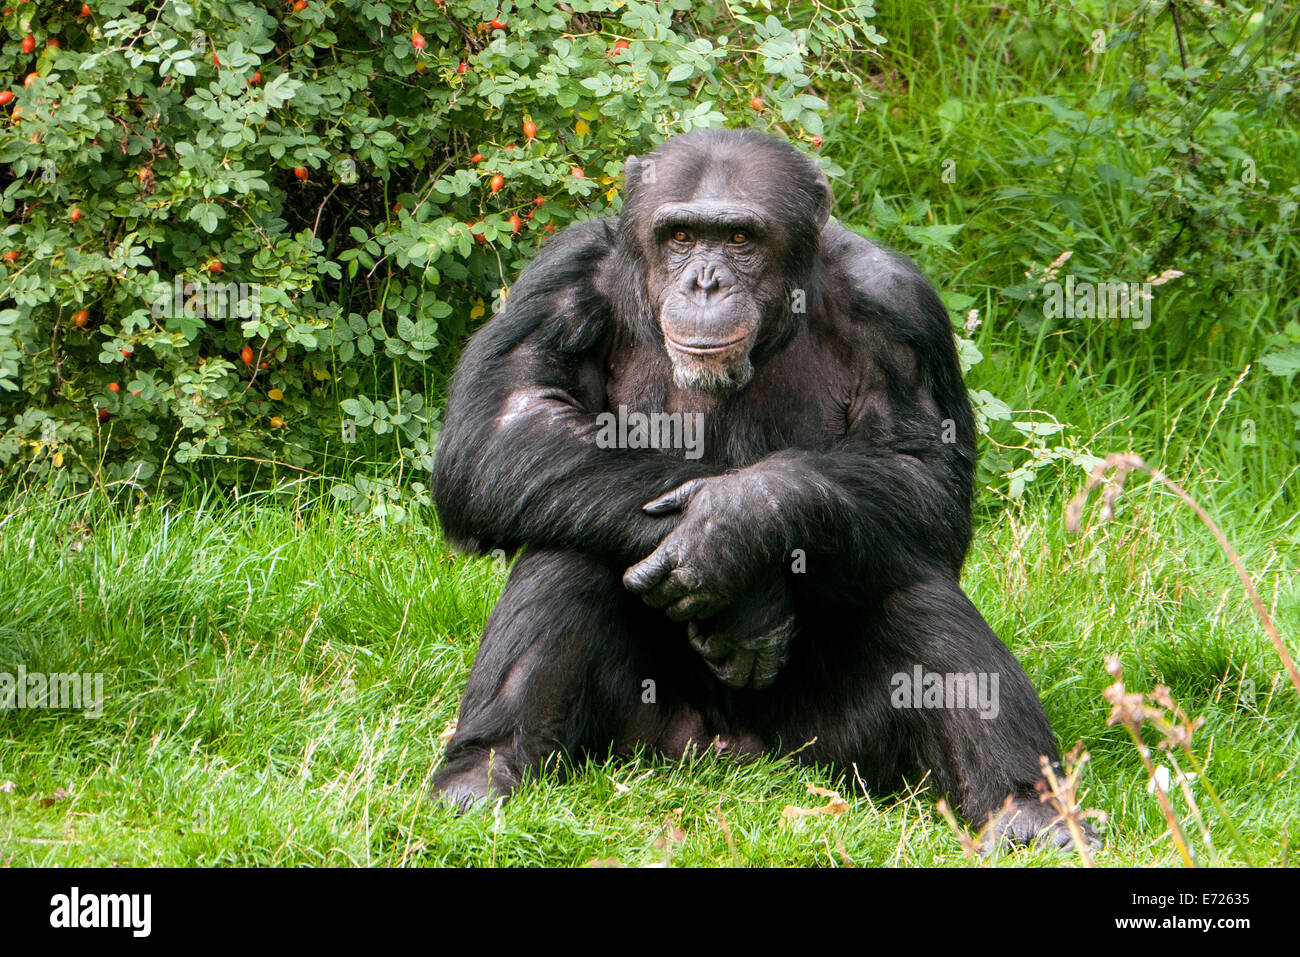 Chimpanzee in Whipsnade Zoo, Dunstable, Bedfordshire, United Kingdom Stock Photo